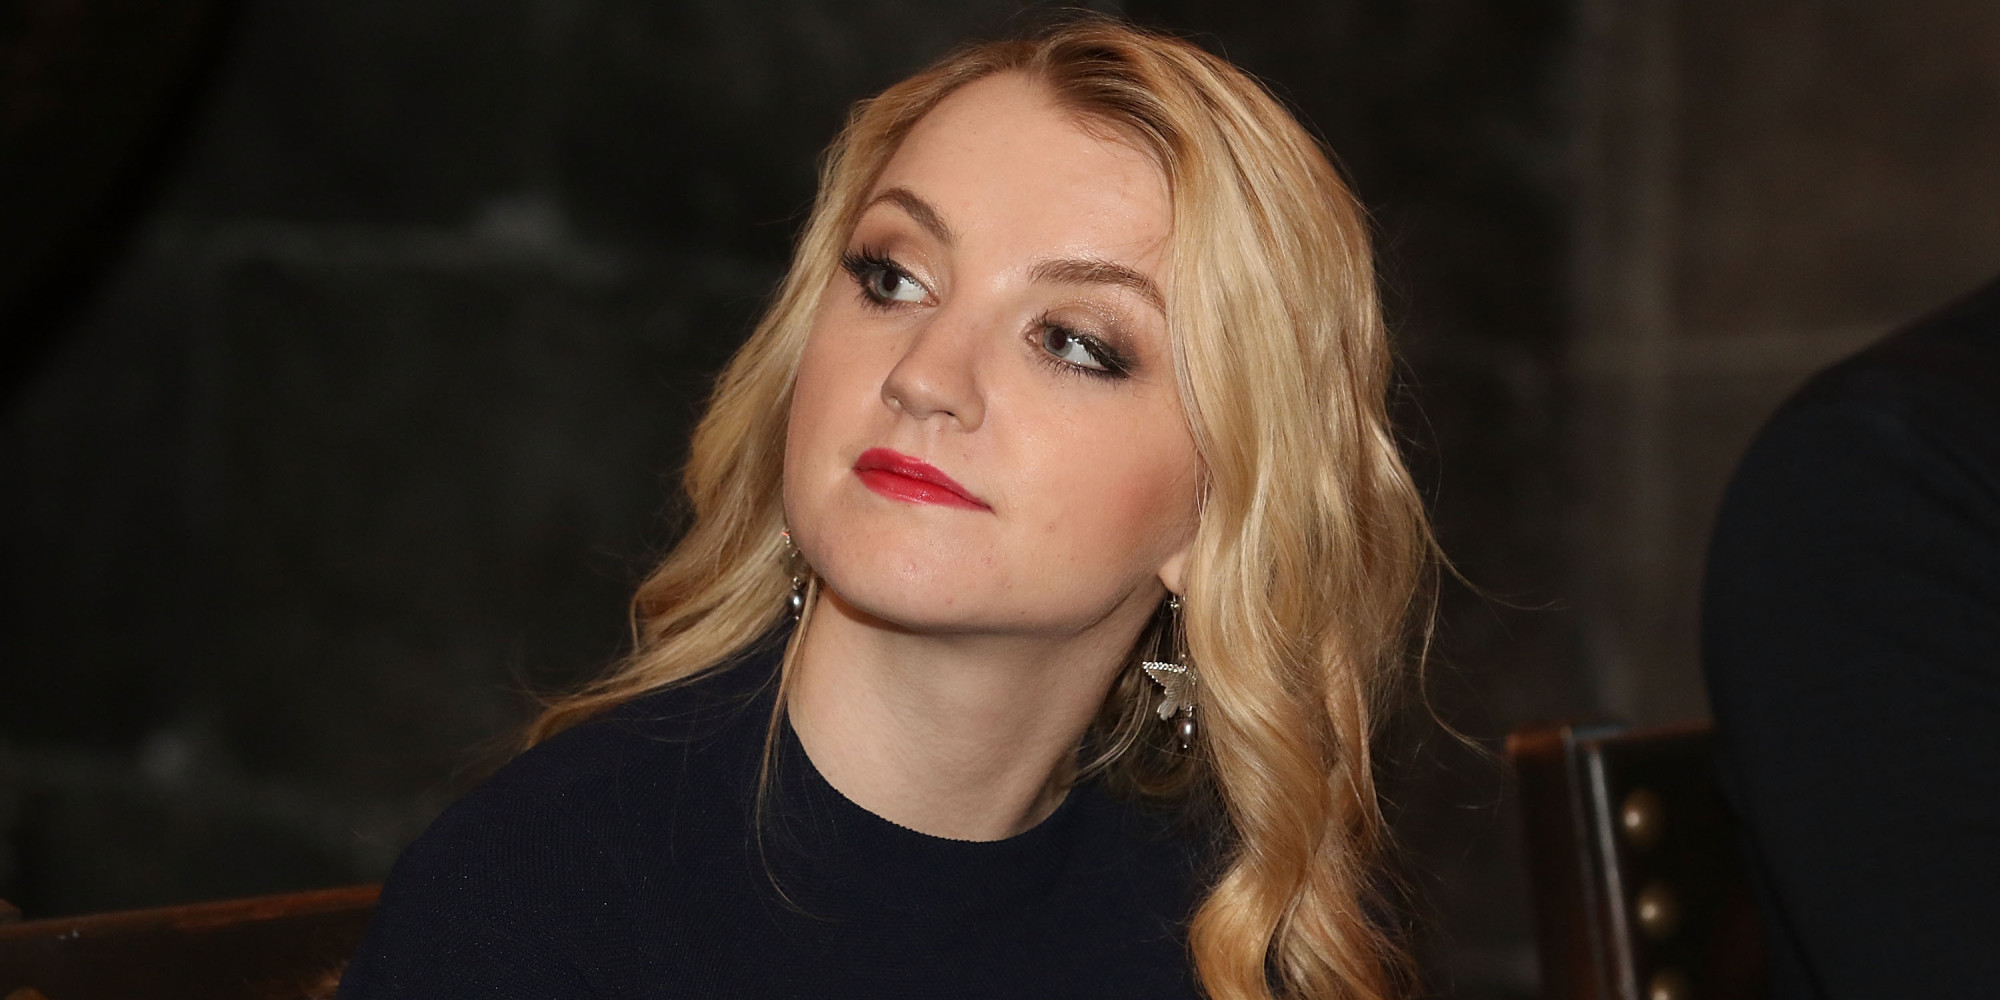 Evanna Lynch Wallpaper HD Full HD Pictures